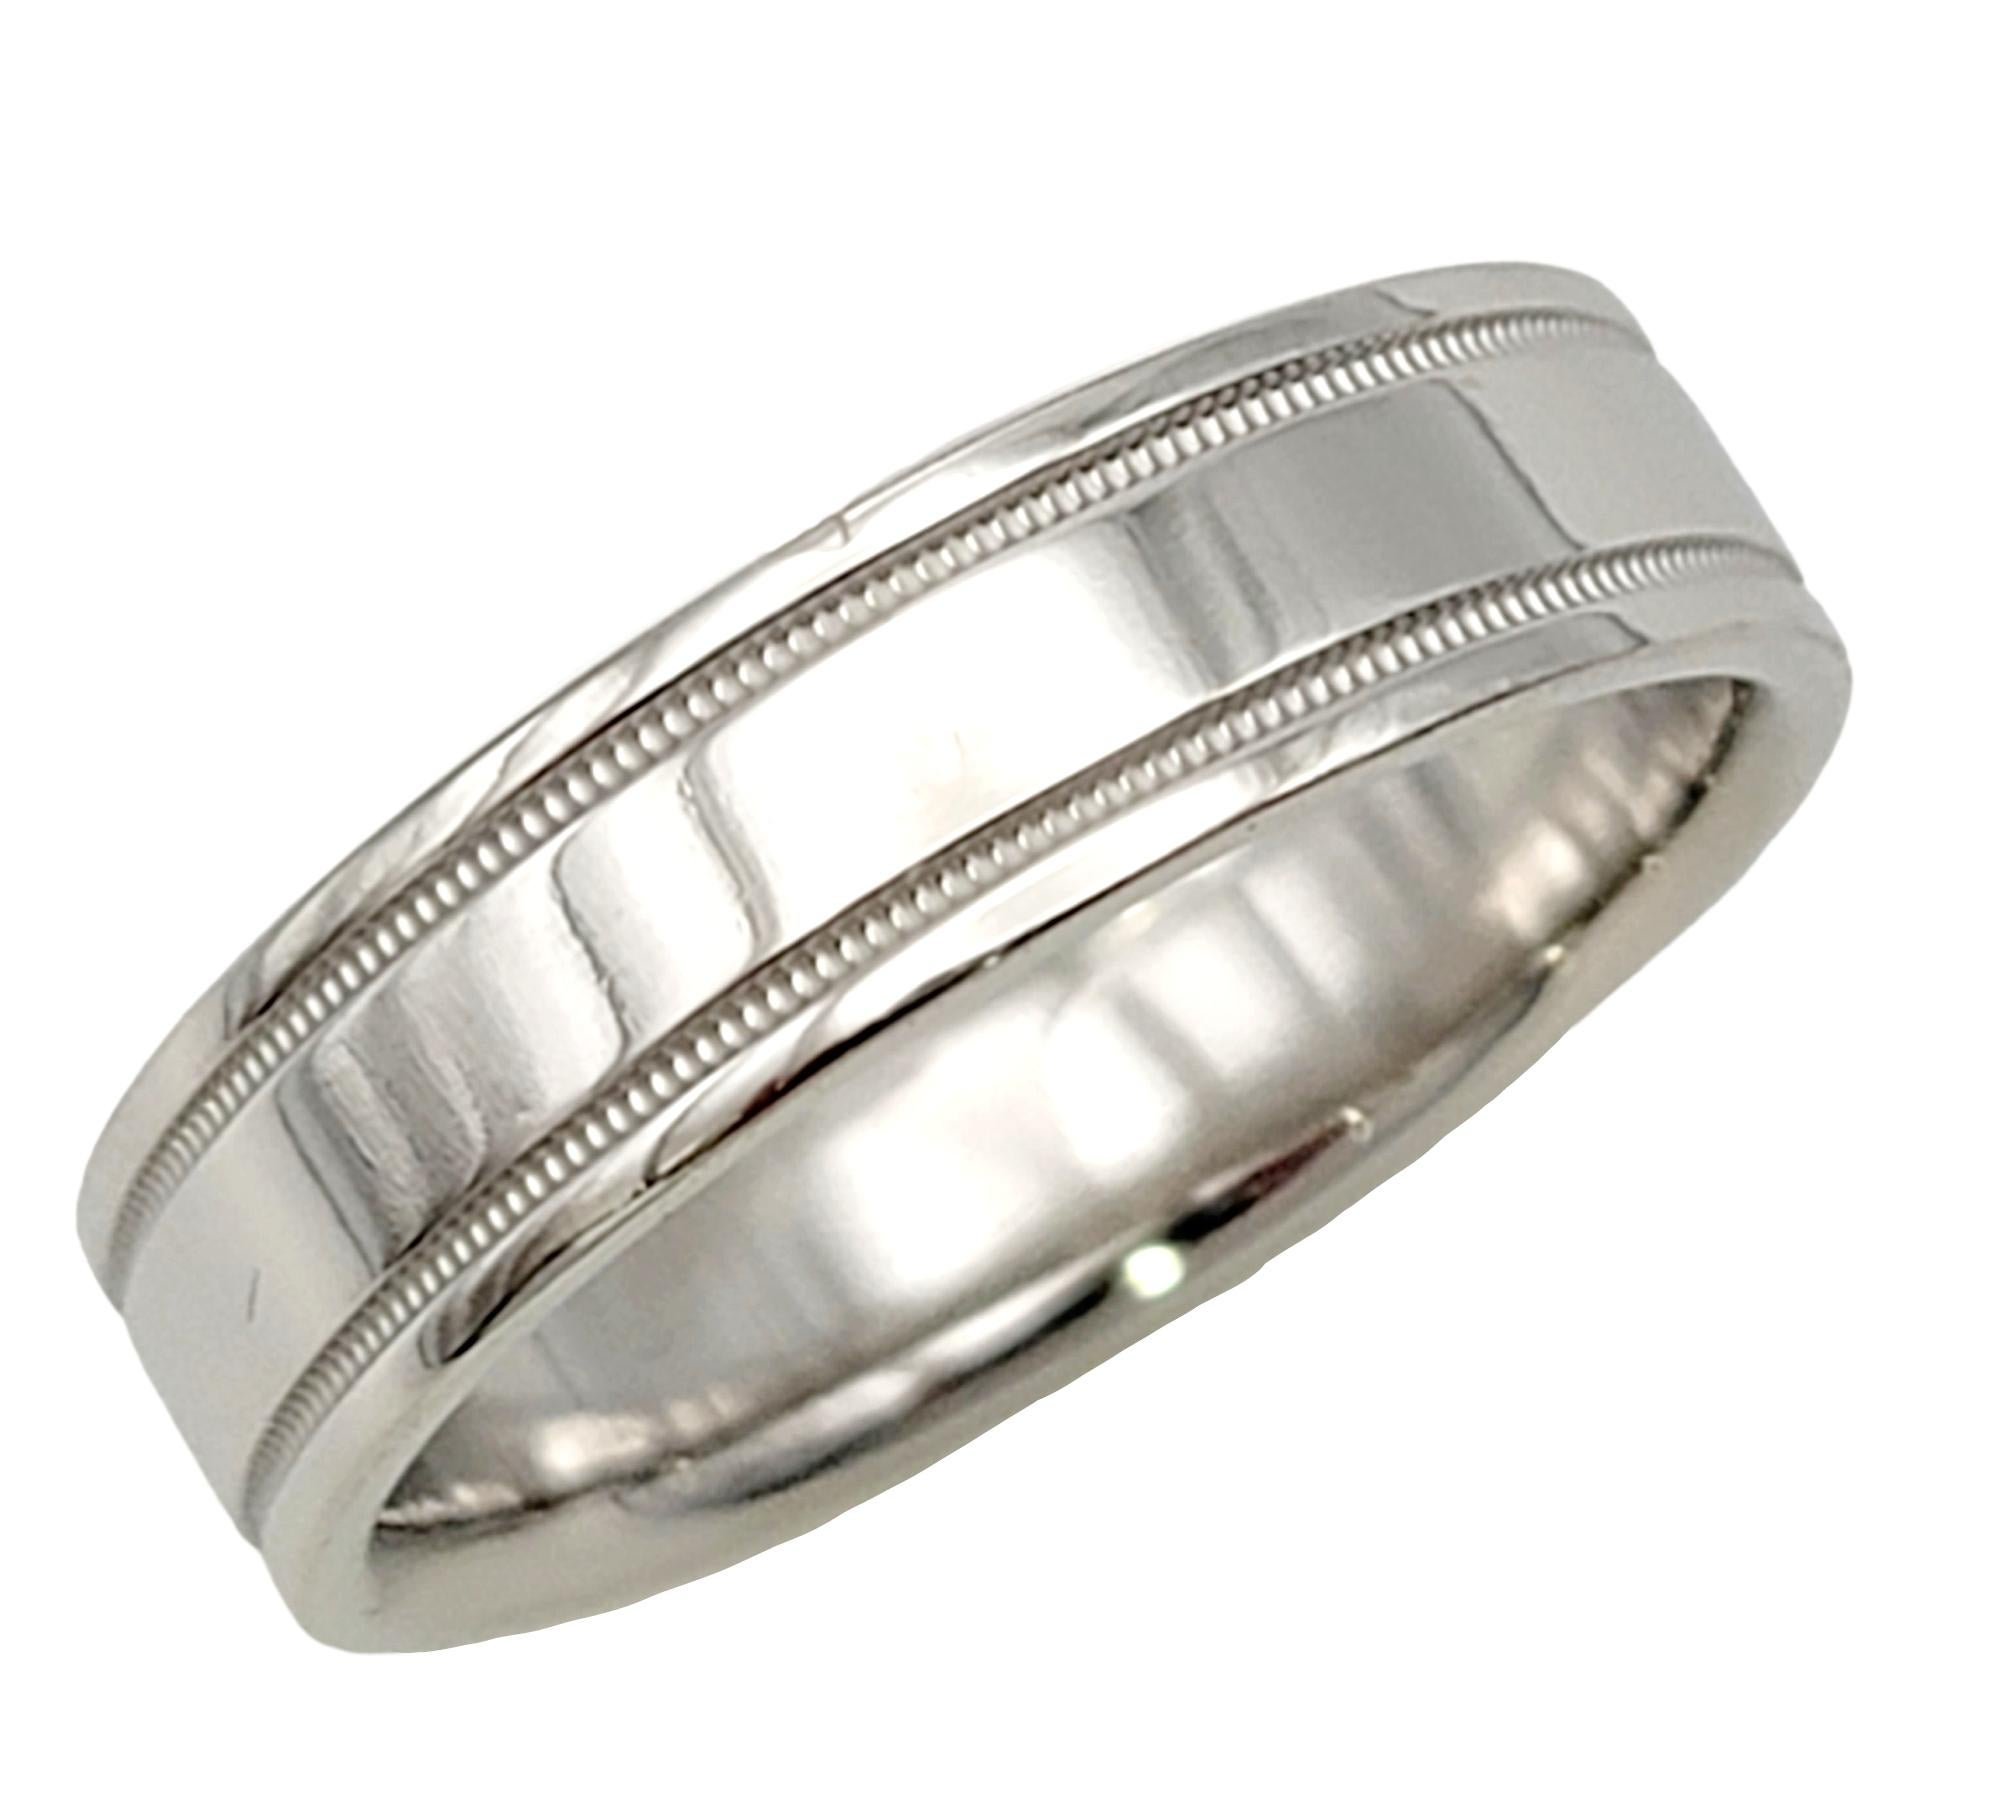 Ring size: 11

This classic mens band ring from Tiffany & Co. is the quintessential wedding ring. Founded in 1837 in New York City, Tiffany & Co. is one of the world's most storied luxury design houses recognized globally for its innovative jewelry